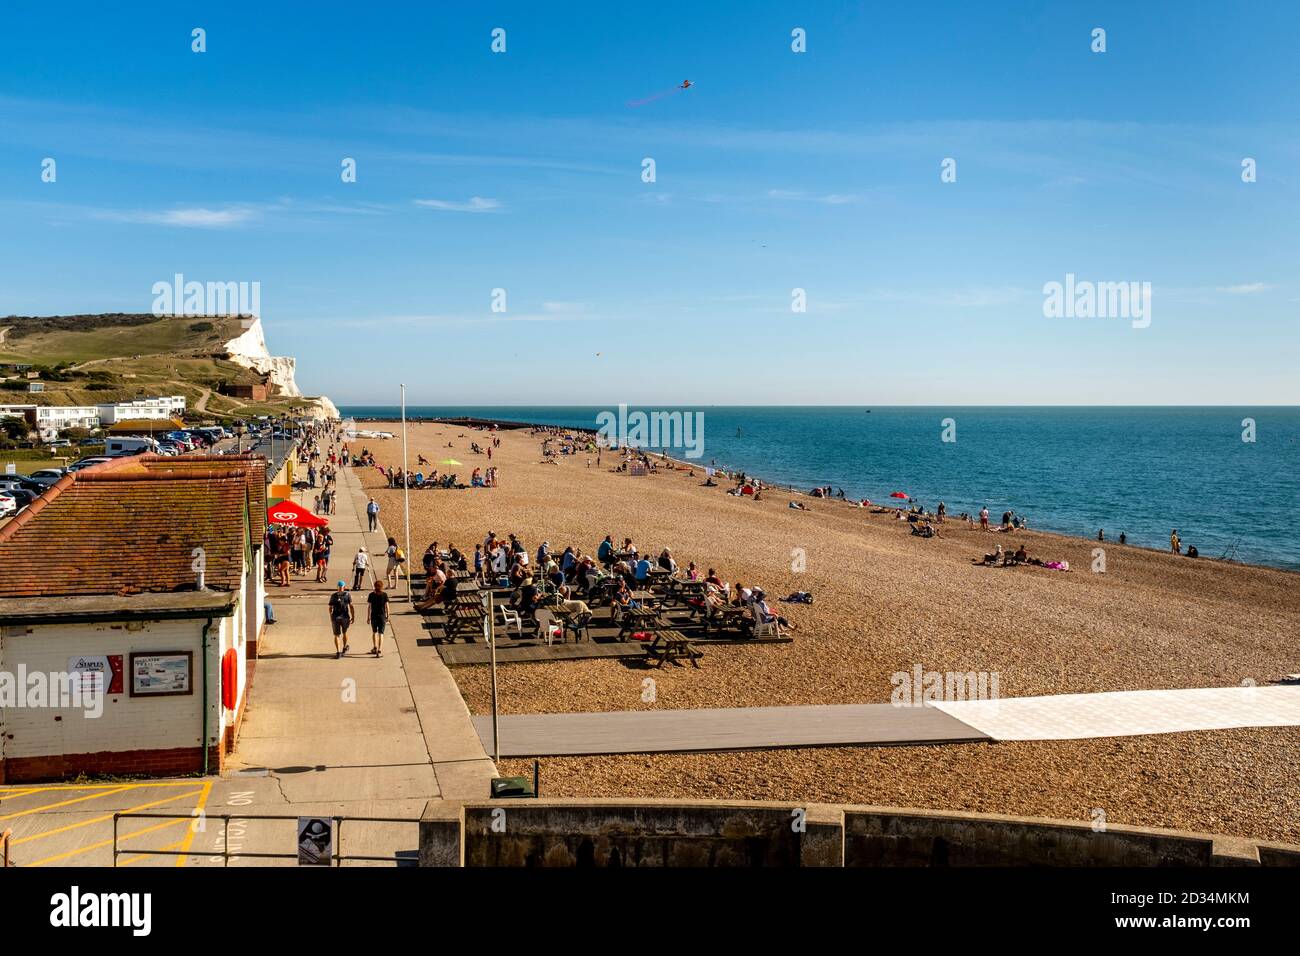 Seaford Beach, Seaford, East Sussex, Royaume-Uni. Banque D'Images